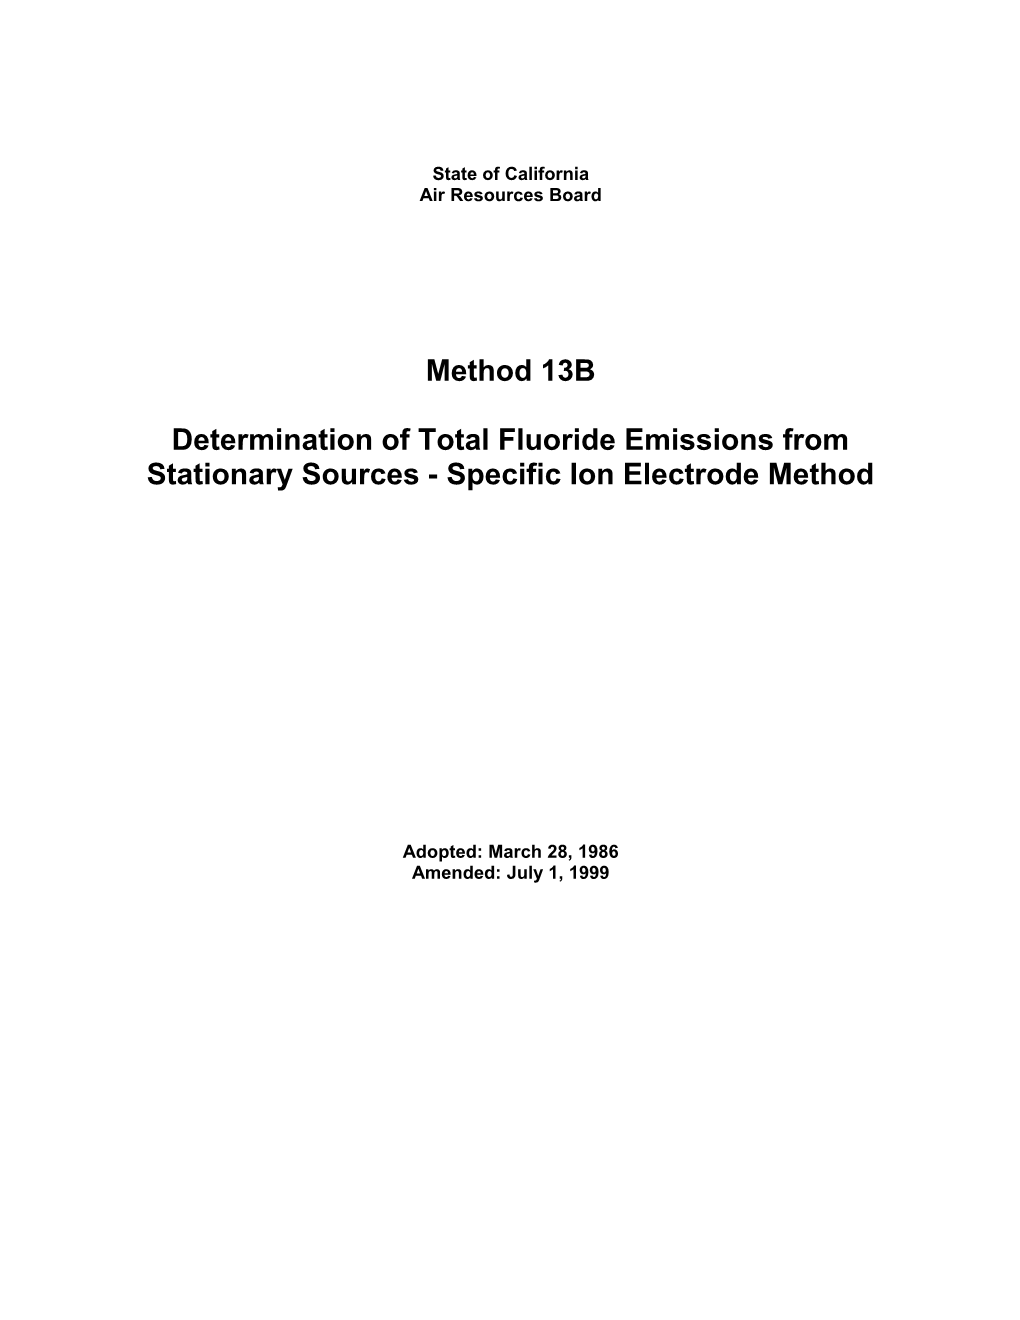 Test Method: Method 13B Determination of Total Fluoride Emissions from Stationary Sources